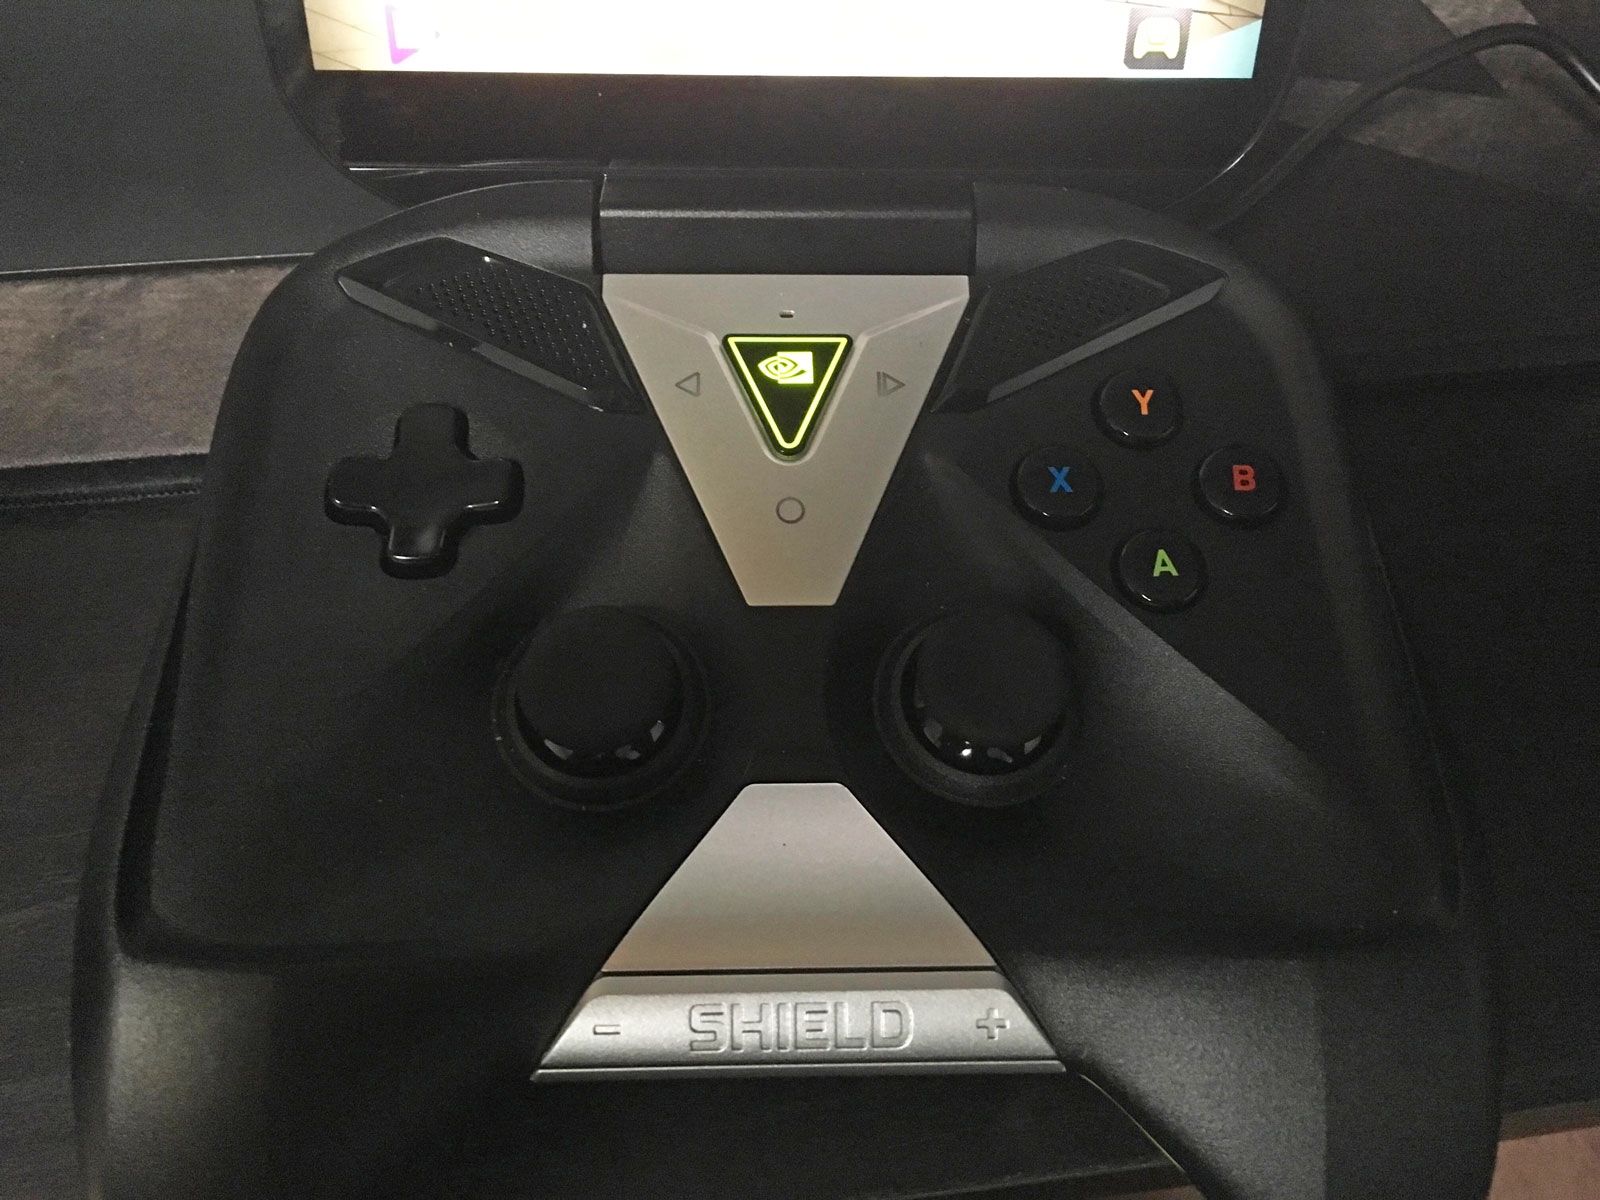 NVIDIA's Shield 2 prototype shows up in a Canadian pawn shop | DeviceDaily.com